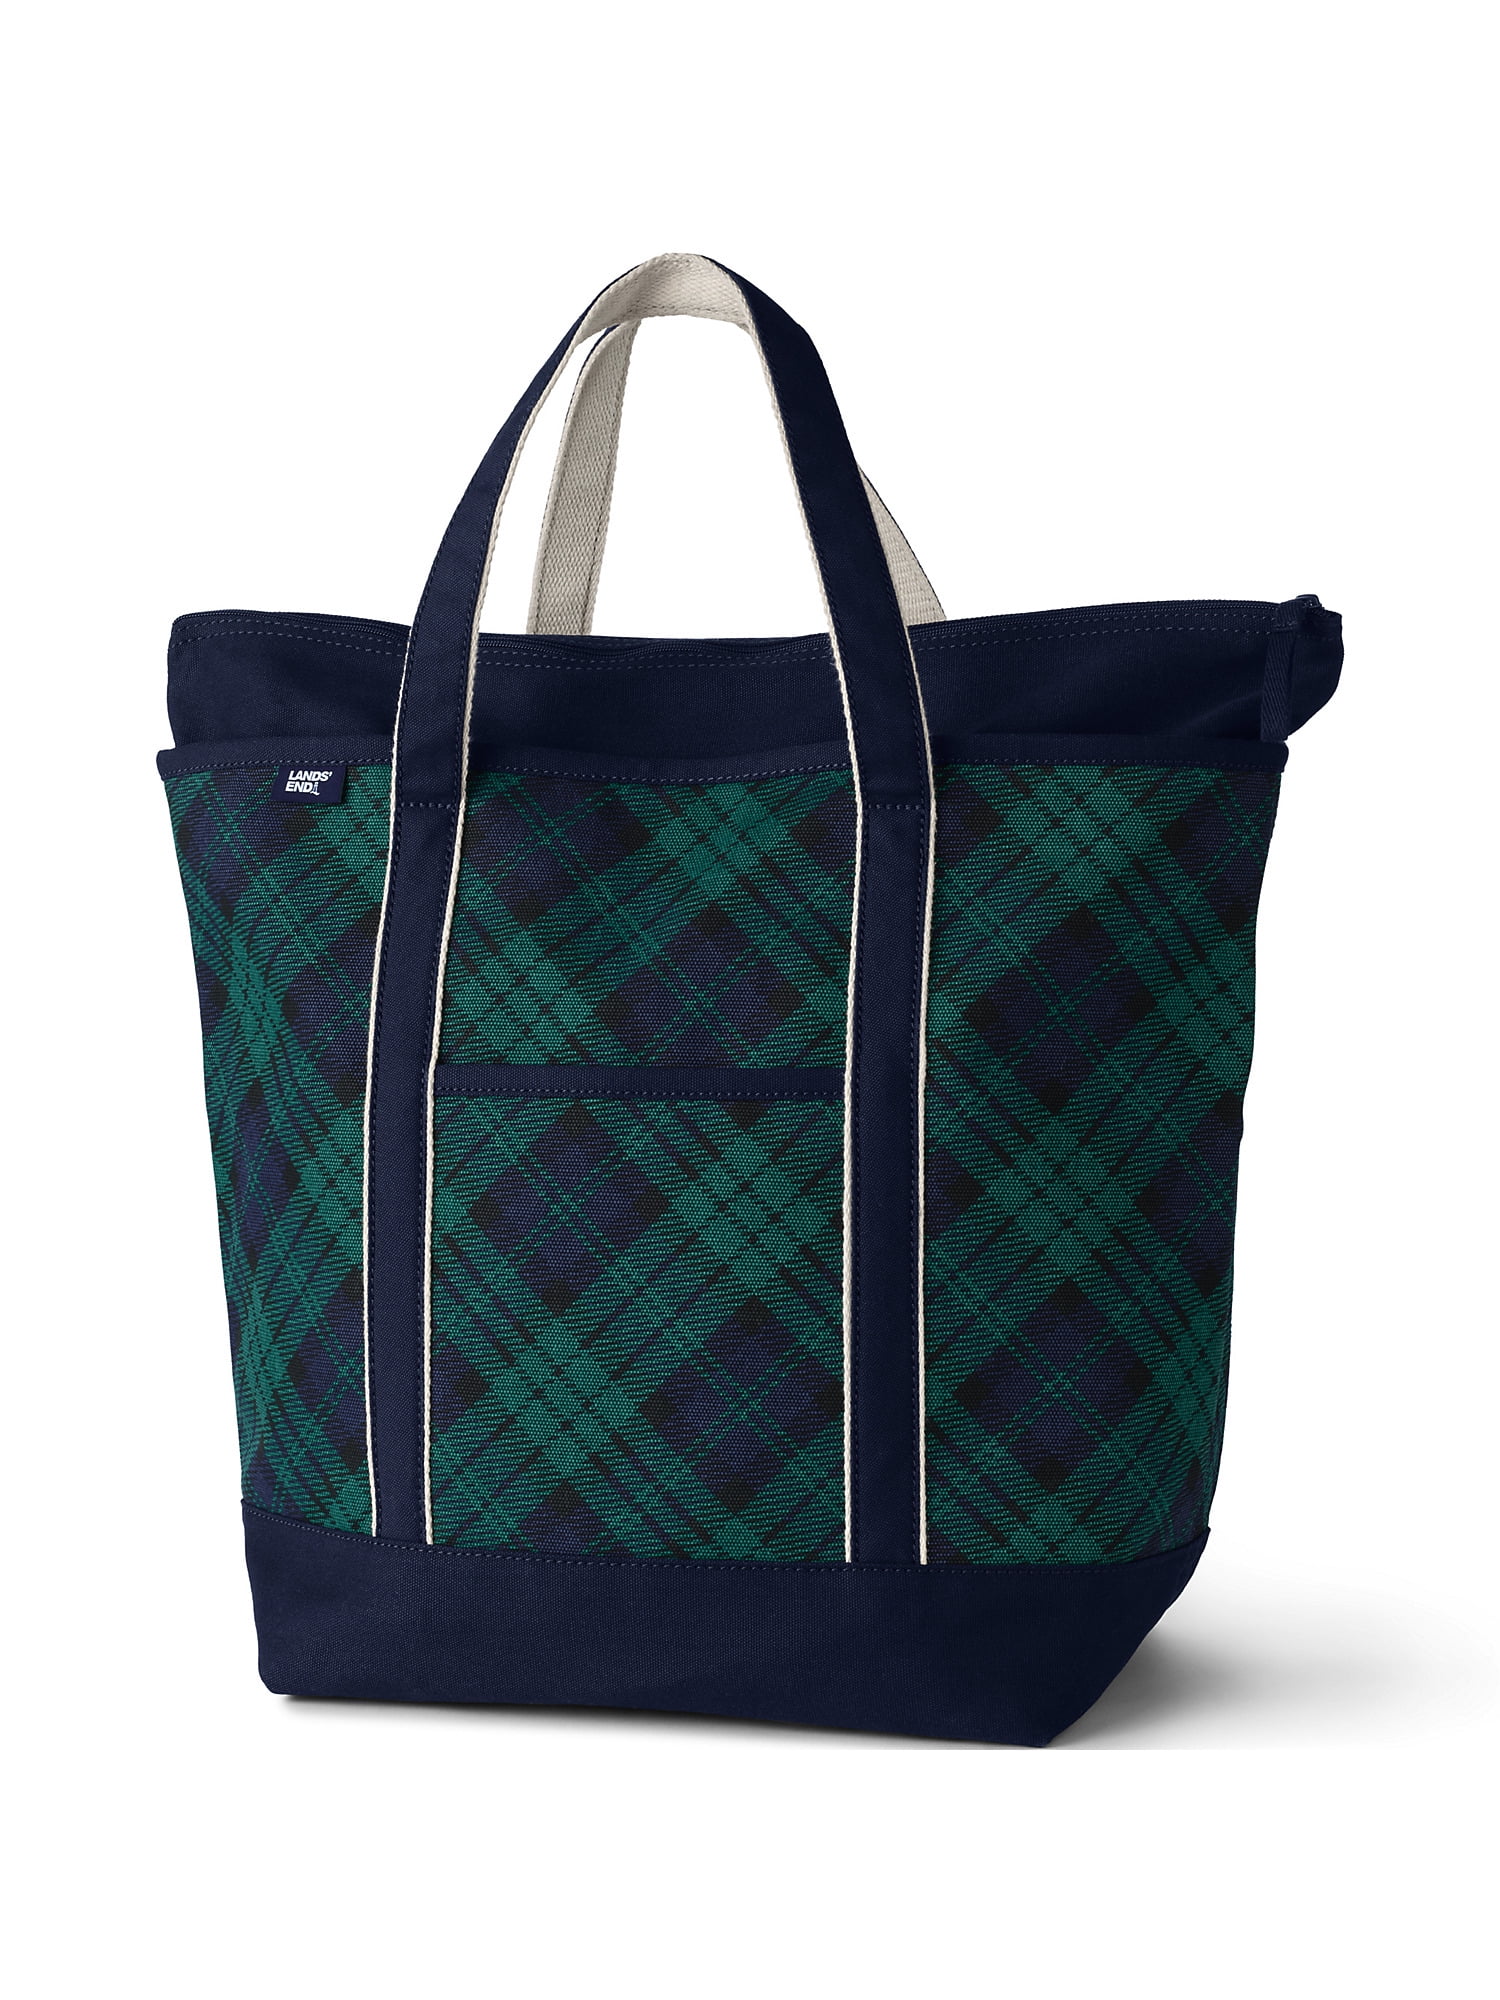 Lands' End Canvas Totes on Sale + Get 40% Off with new Code!